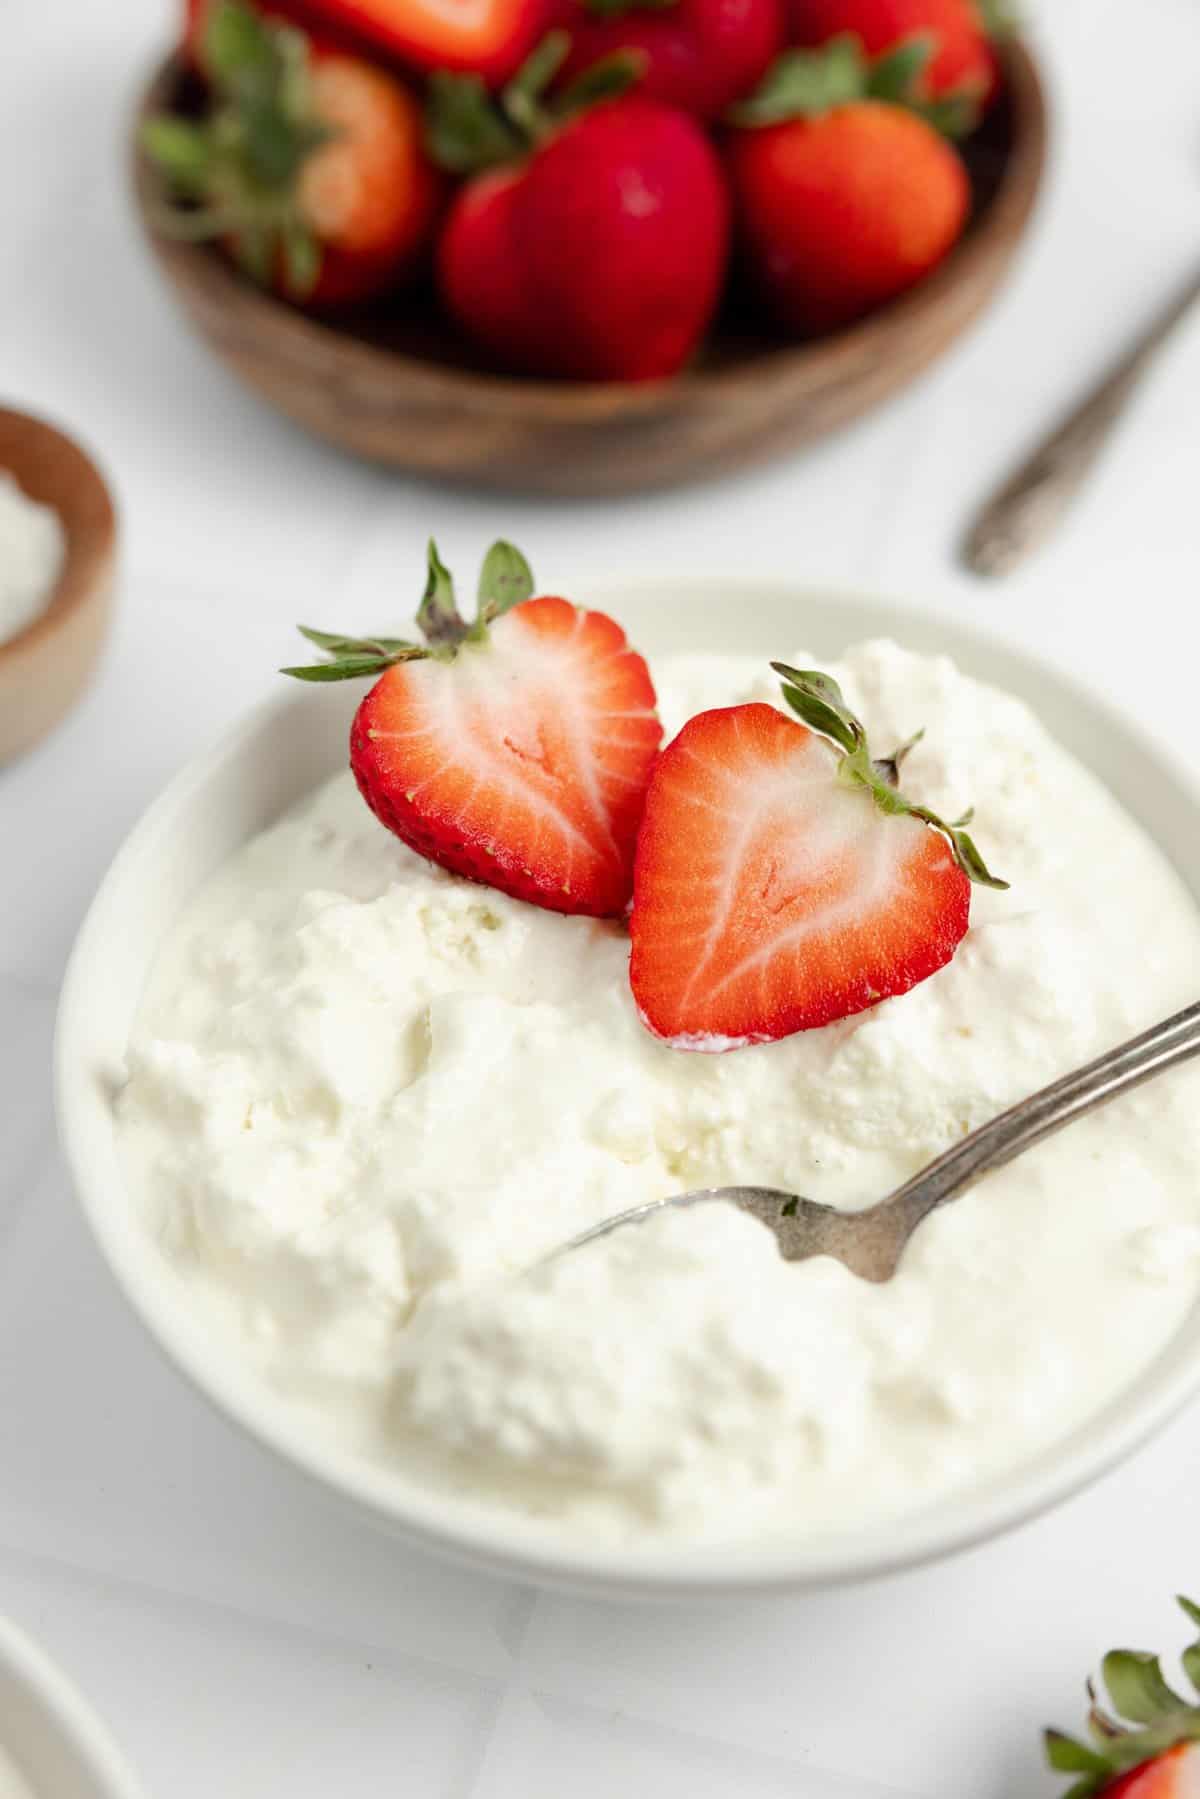 homemade cottage cheese topped with halved strawberries in a white bowl. More strawberries in a bowl in the background.